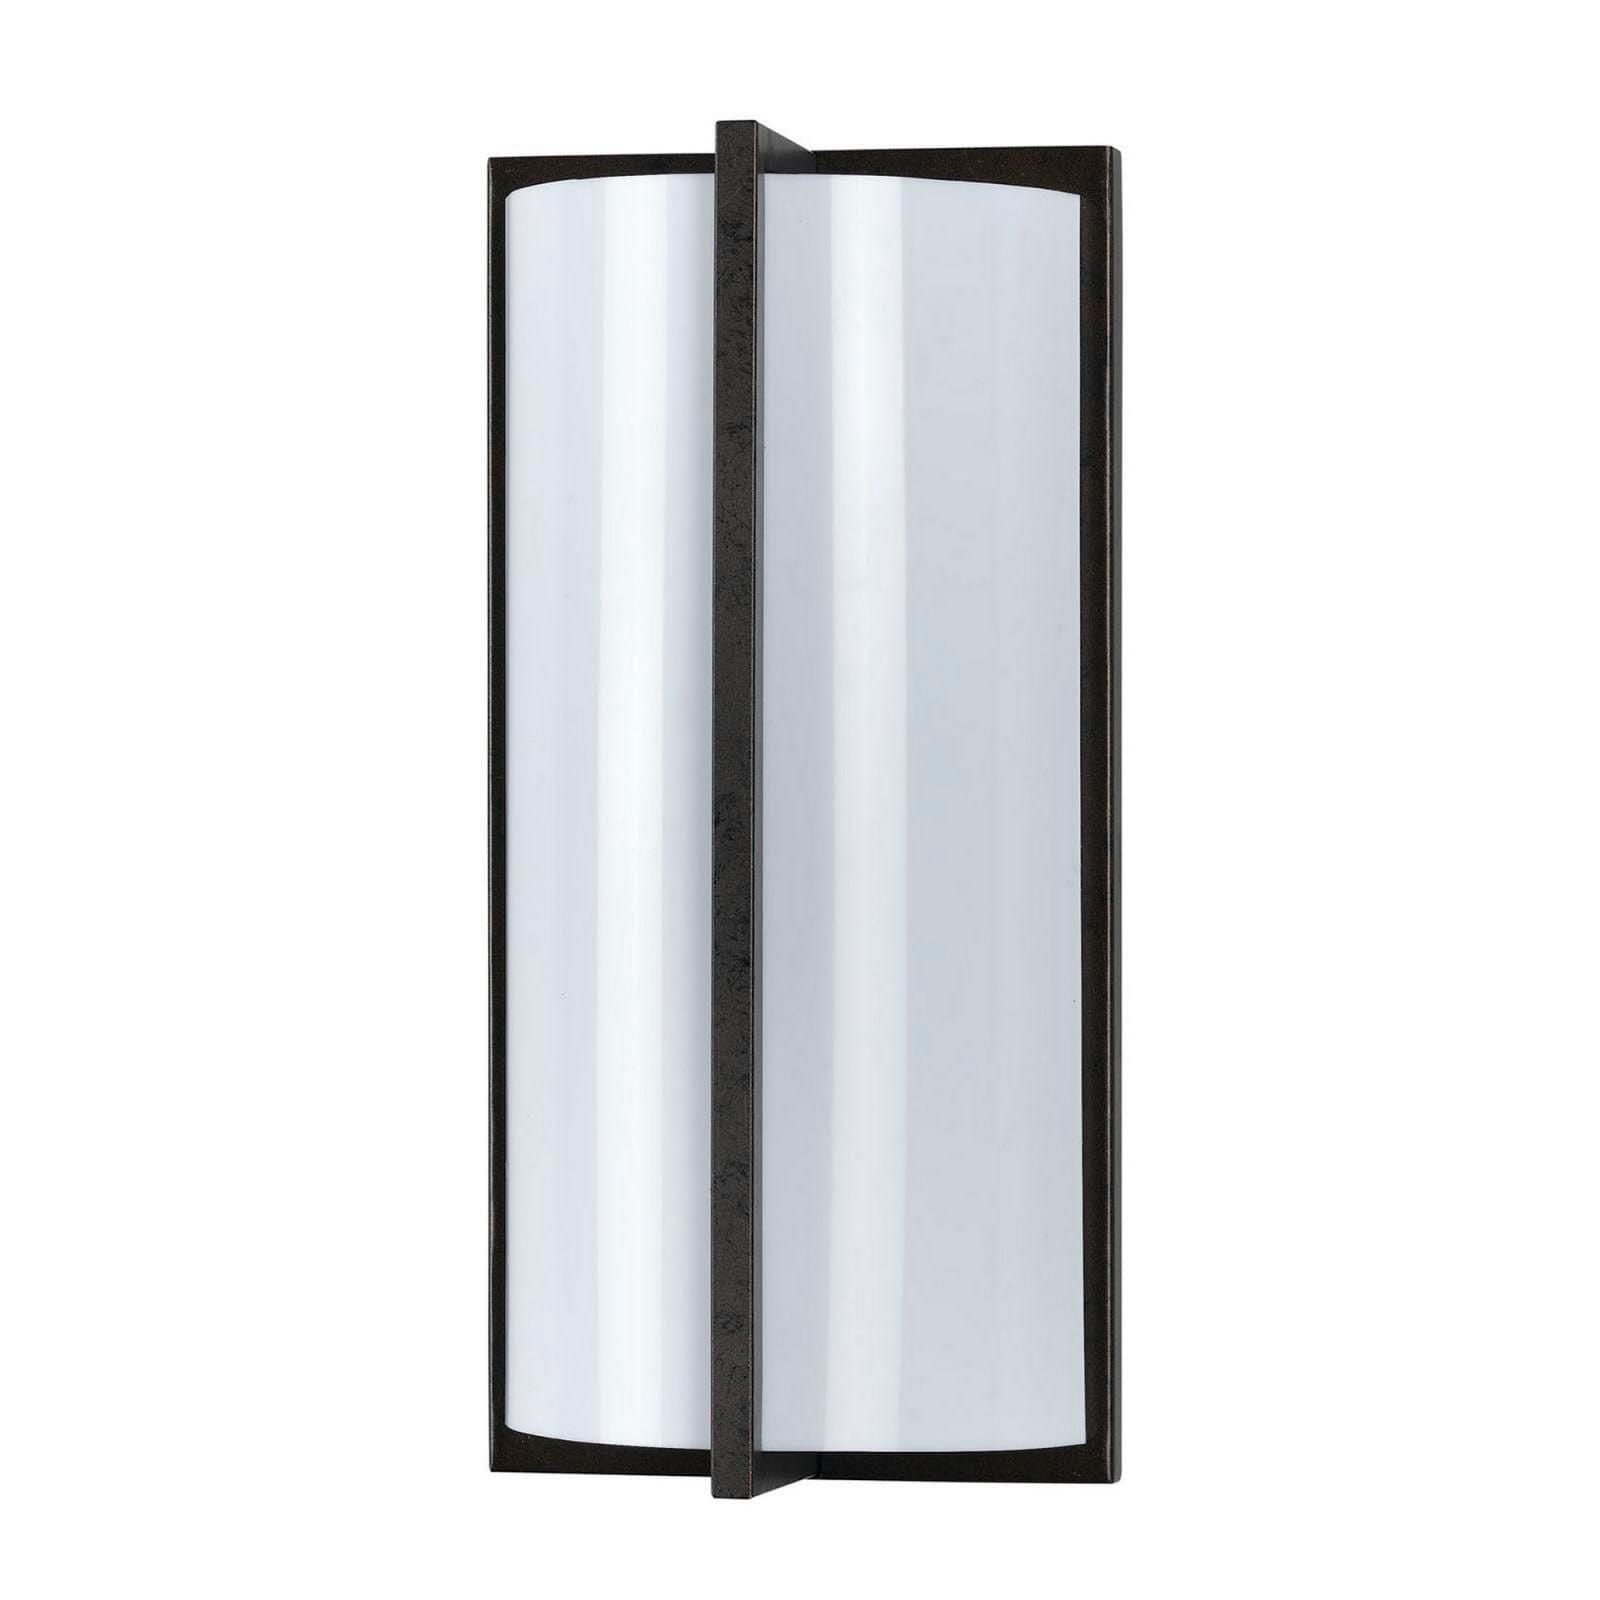 Benzara Cylindrical Shaped Plc Wall Lamp With 3D Design, Set Of 4, Black And White By Benzara Wall Lamps BM220708